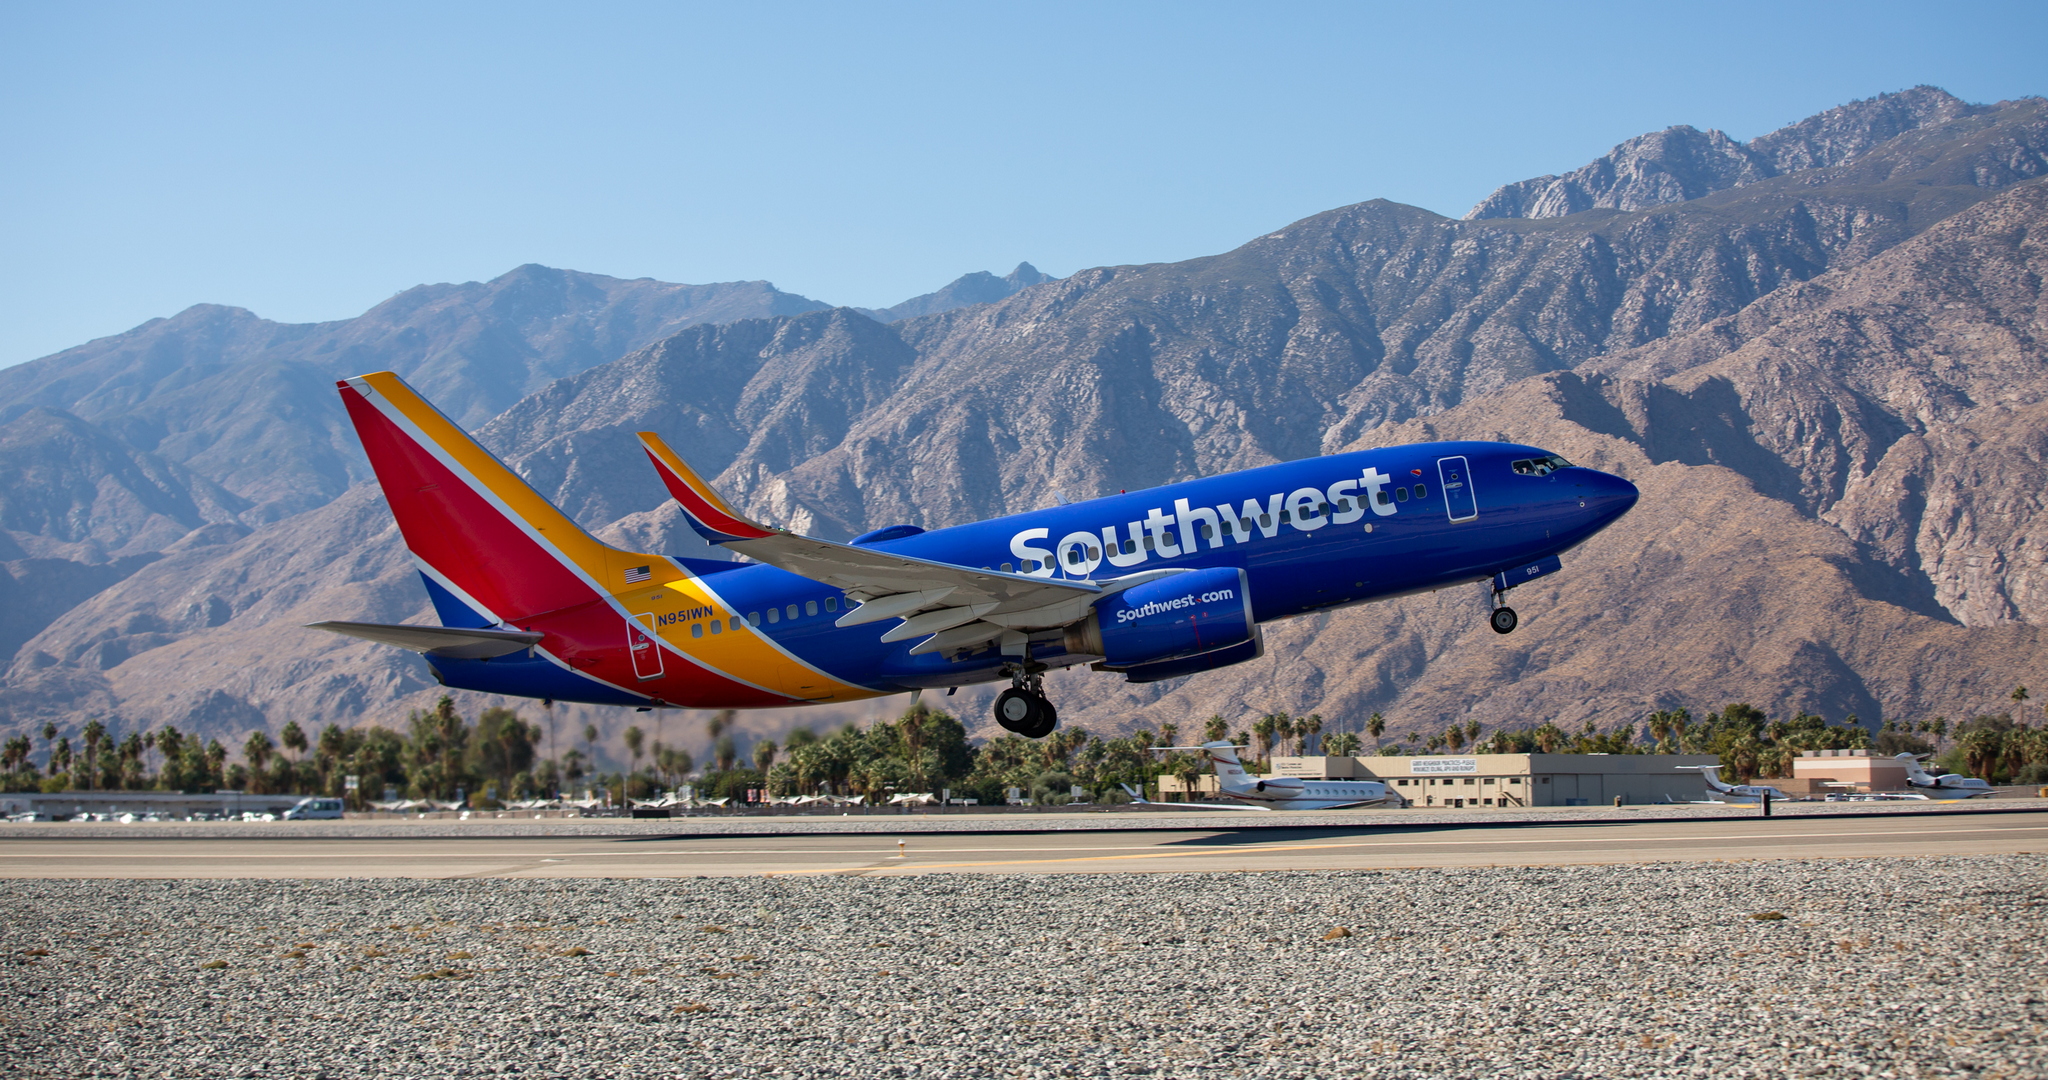 Southwest Airlines 737-700 taking off with mountains in back